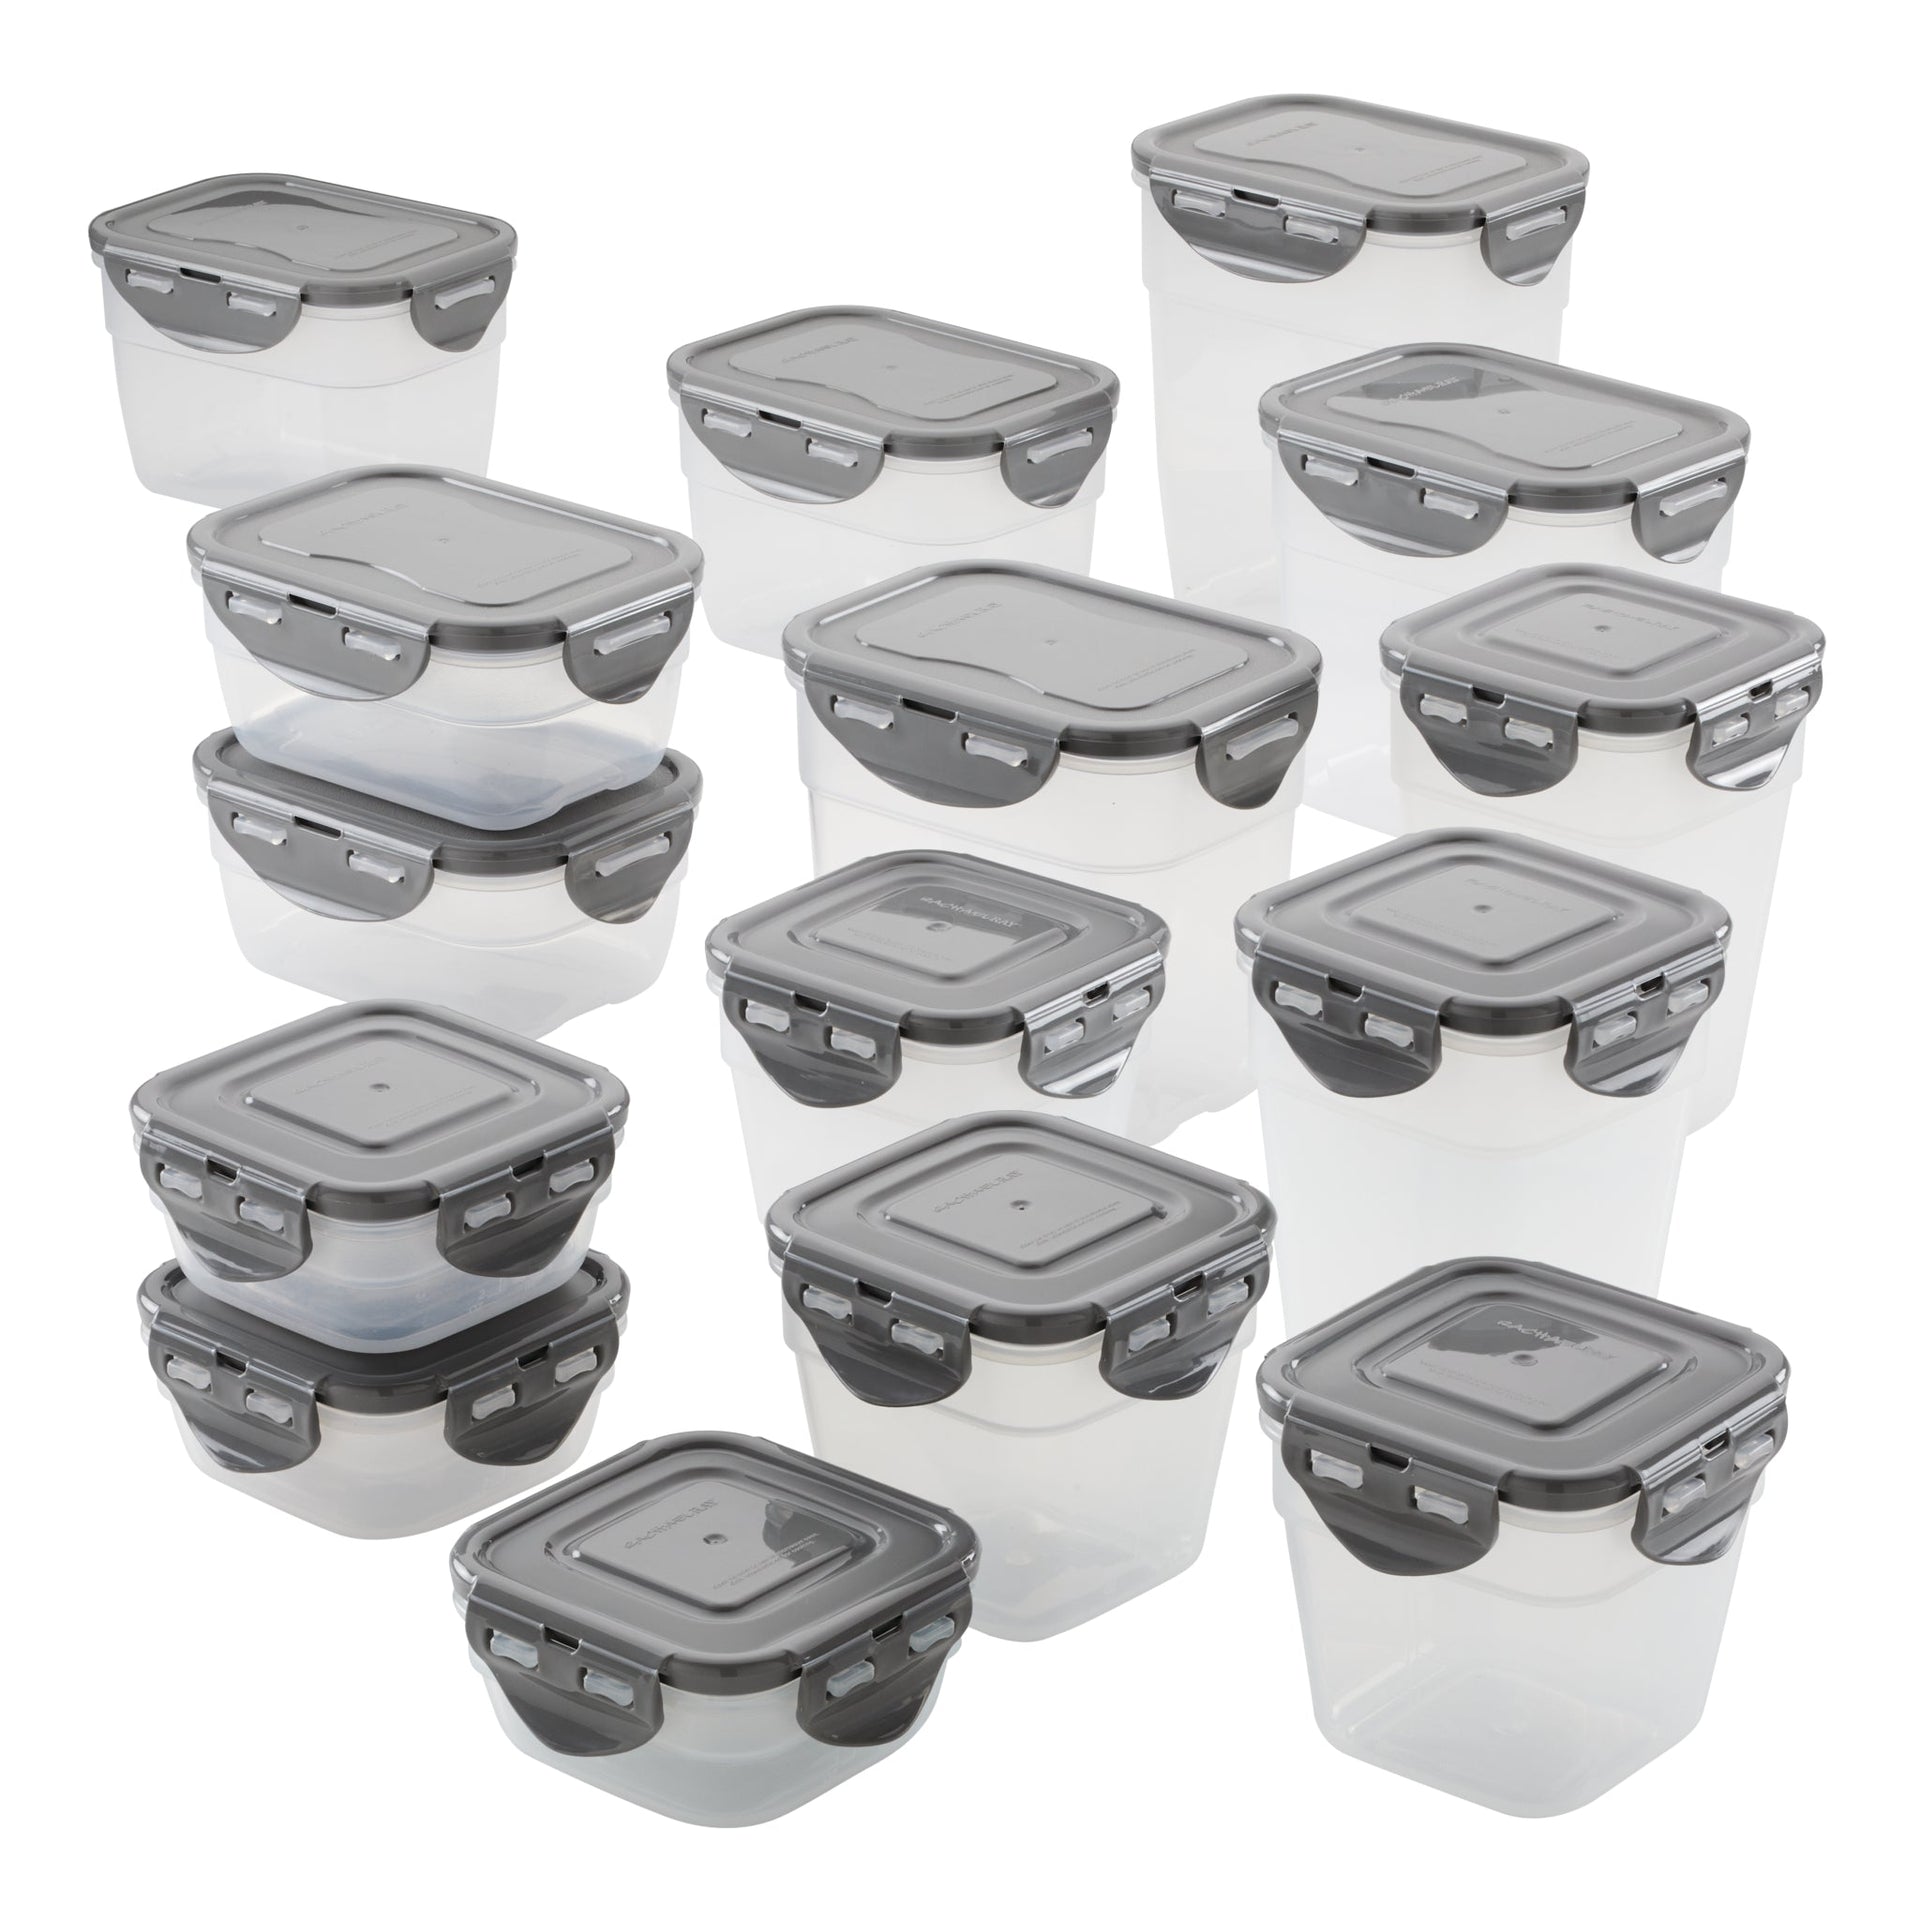 Rubbermaid Easy Find Lids Container, Glass, 5.5 Cups, Tableware &  Serveware